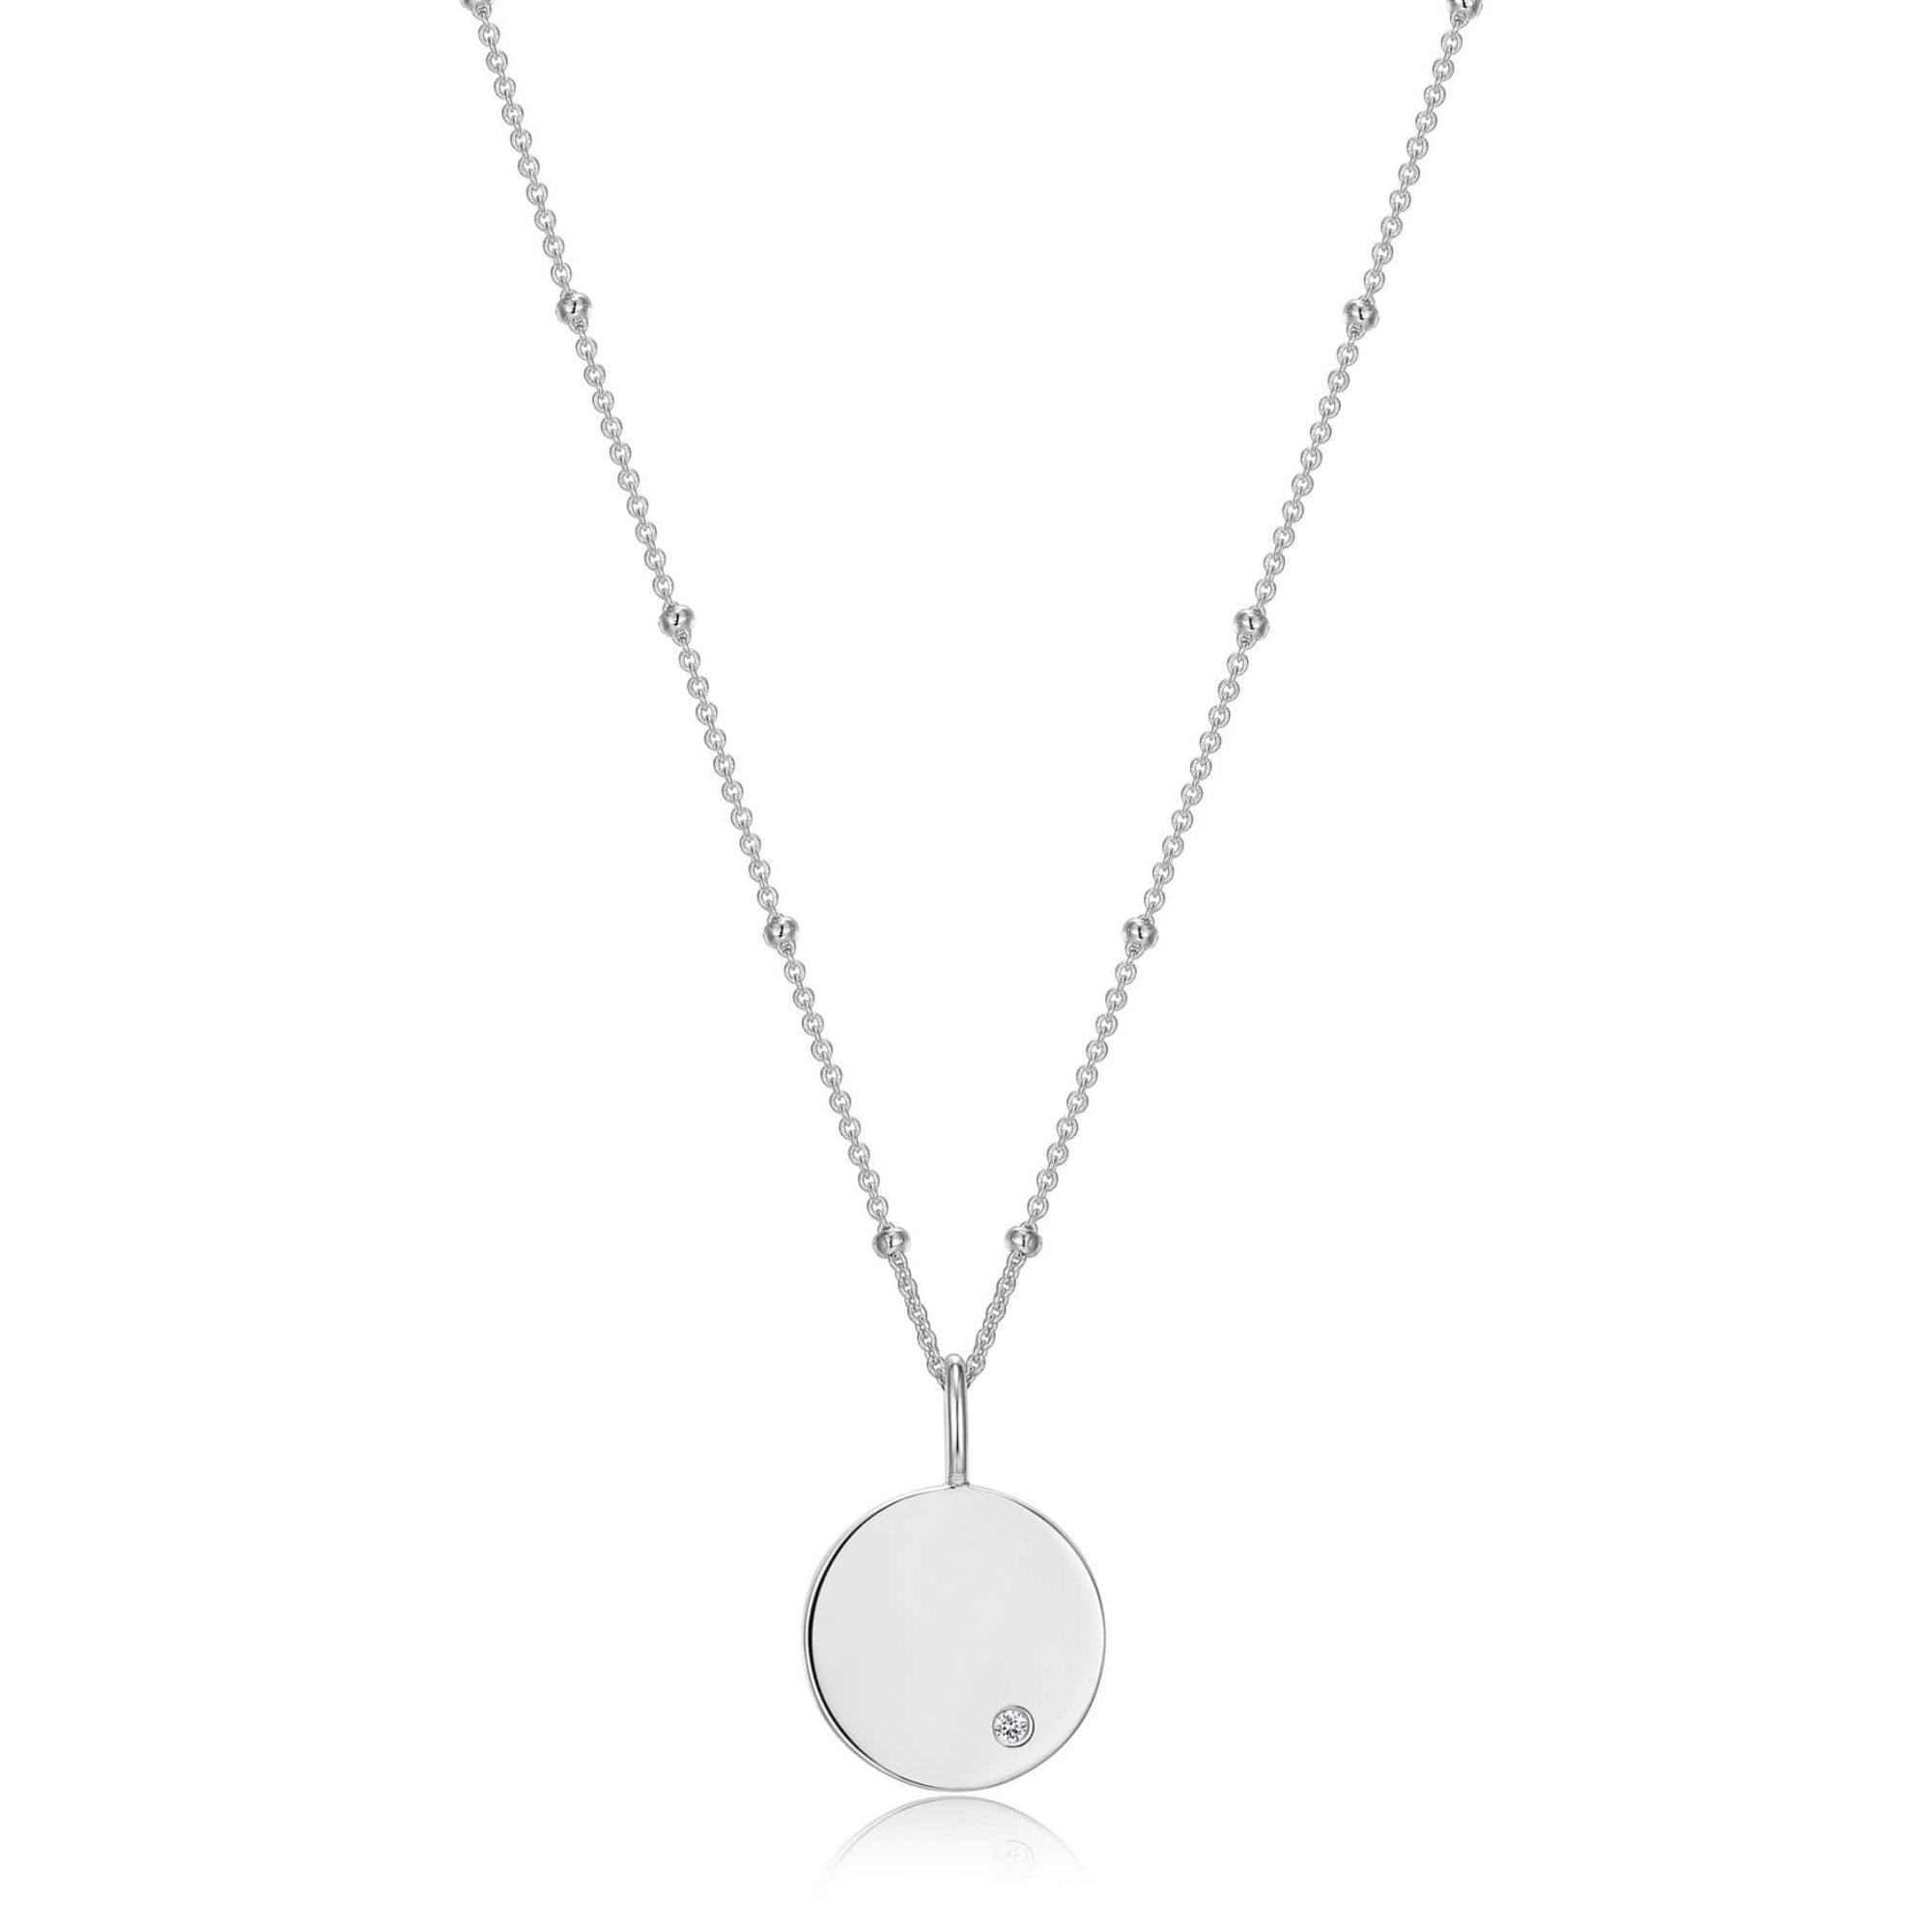 Diamondlite CZ disc necklace in sterling silver at Arman's Jewellers Kitchener